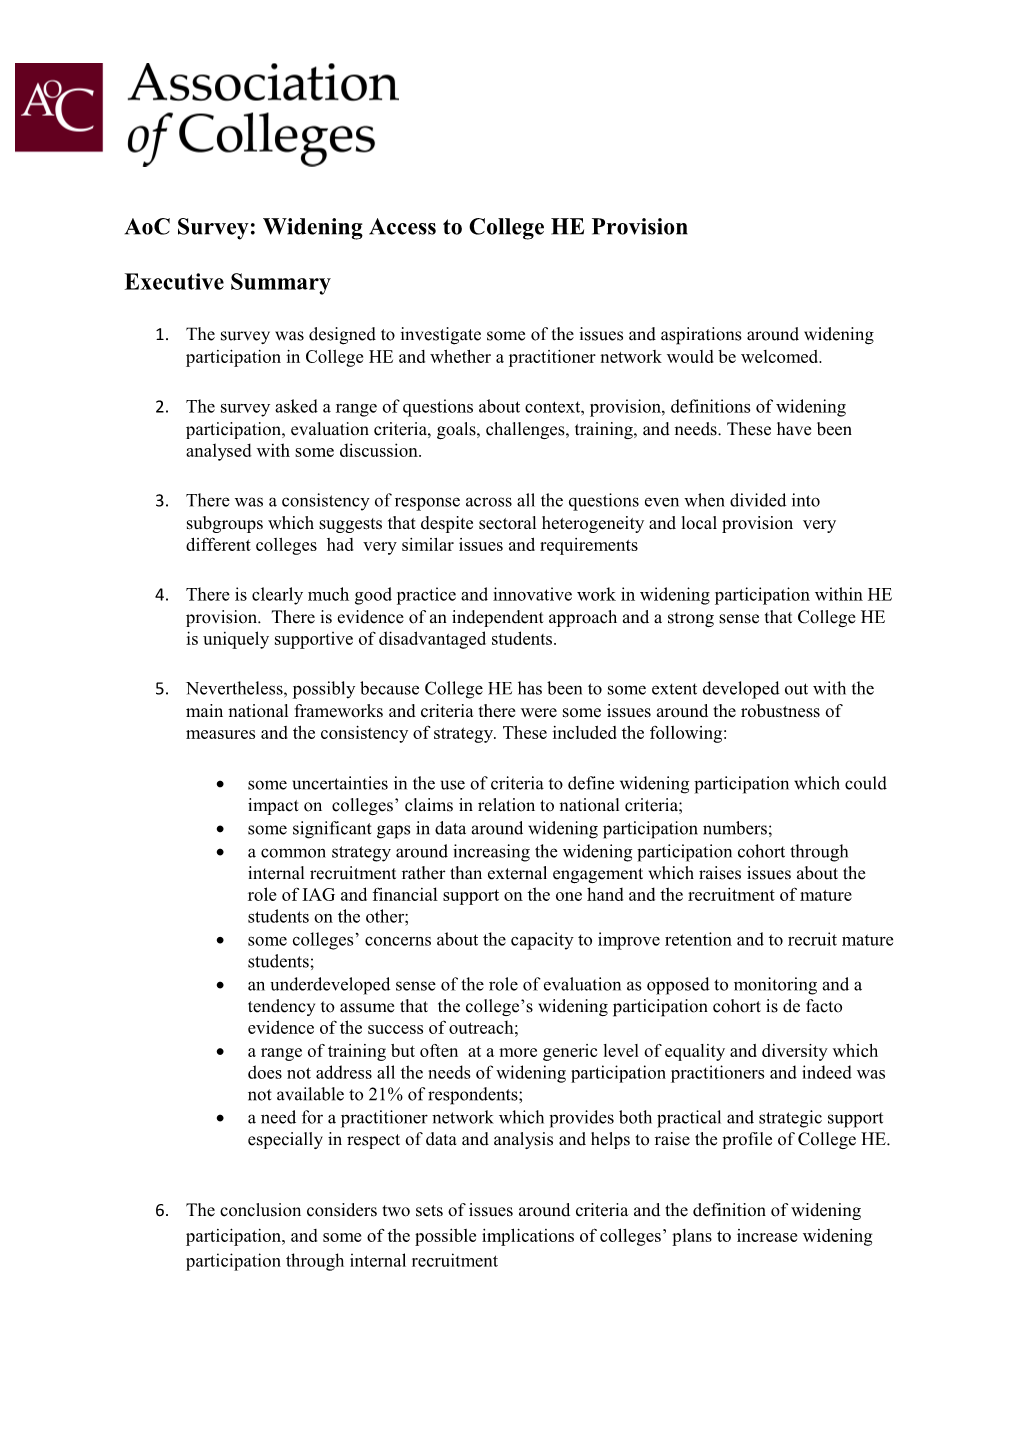 Aoc Survey: Widening Access to College HE Provision